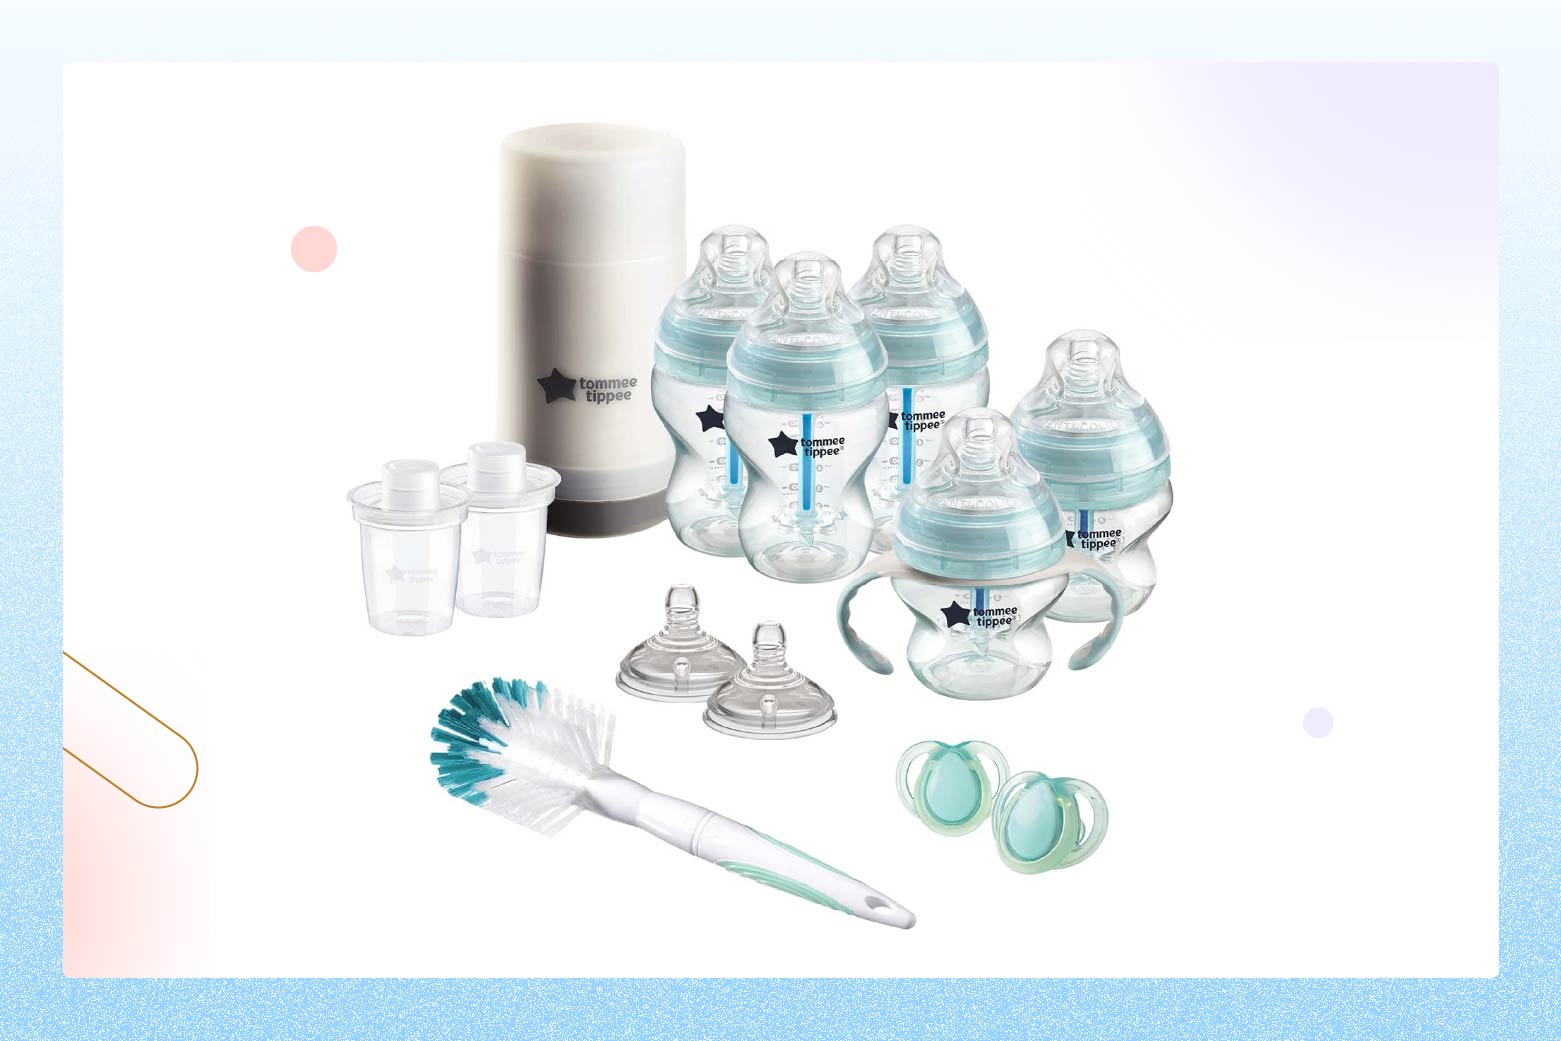 Product photo of the Tommee Tippee Baby Bottle Gift Set, with five bottles, a bottle warmer, bottle brush, and other accessories